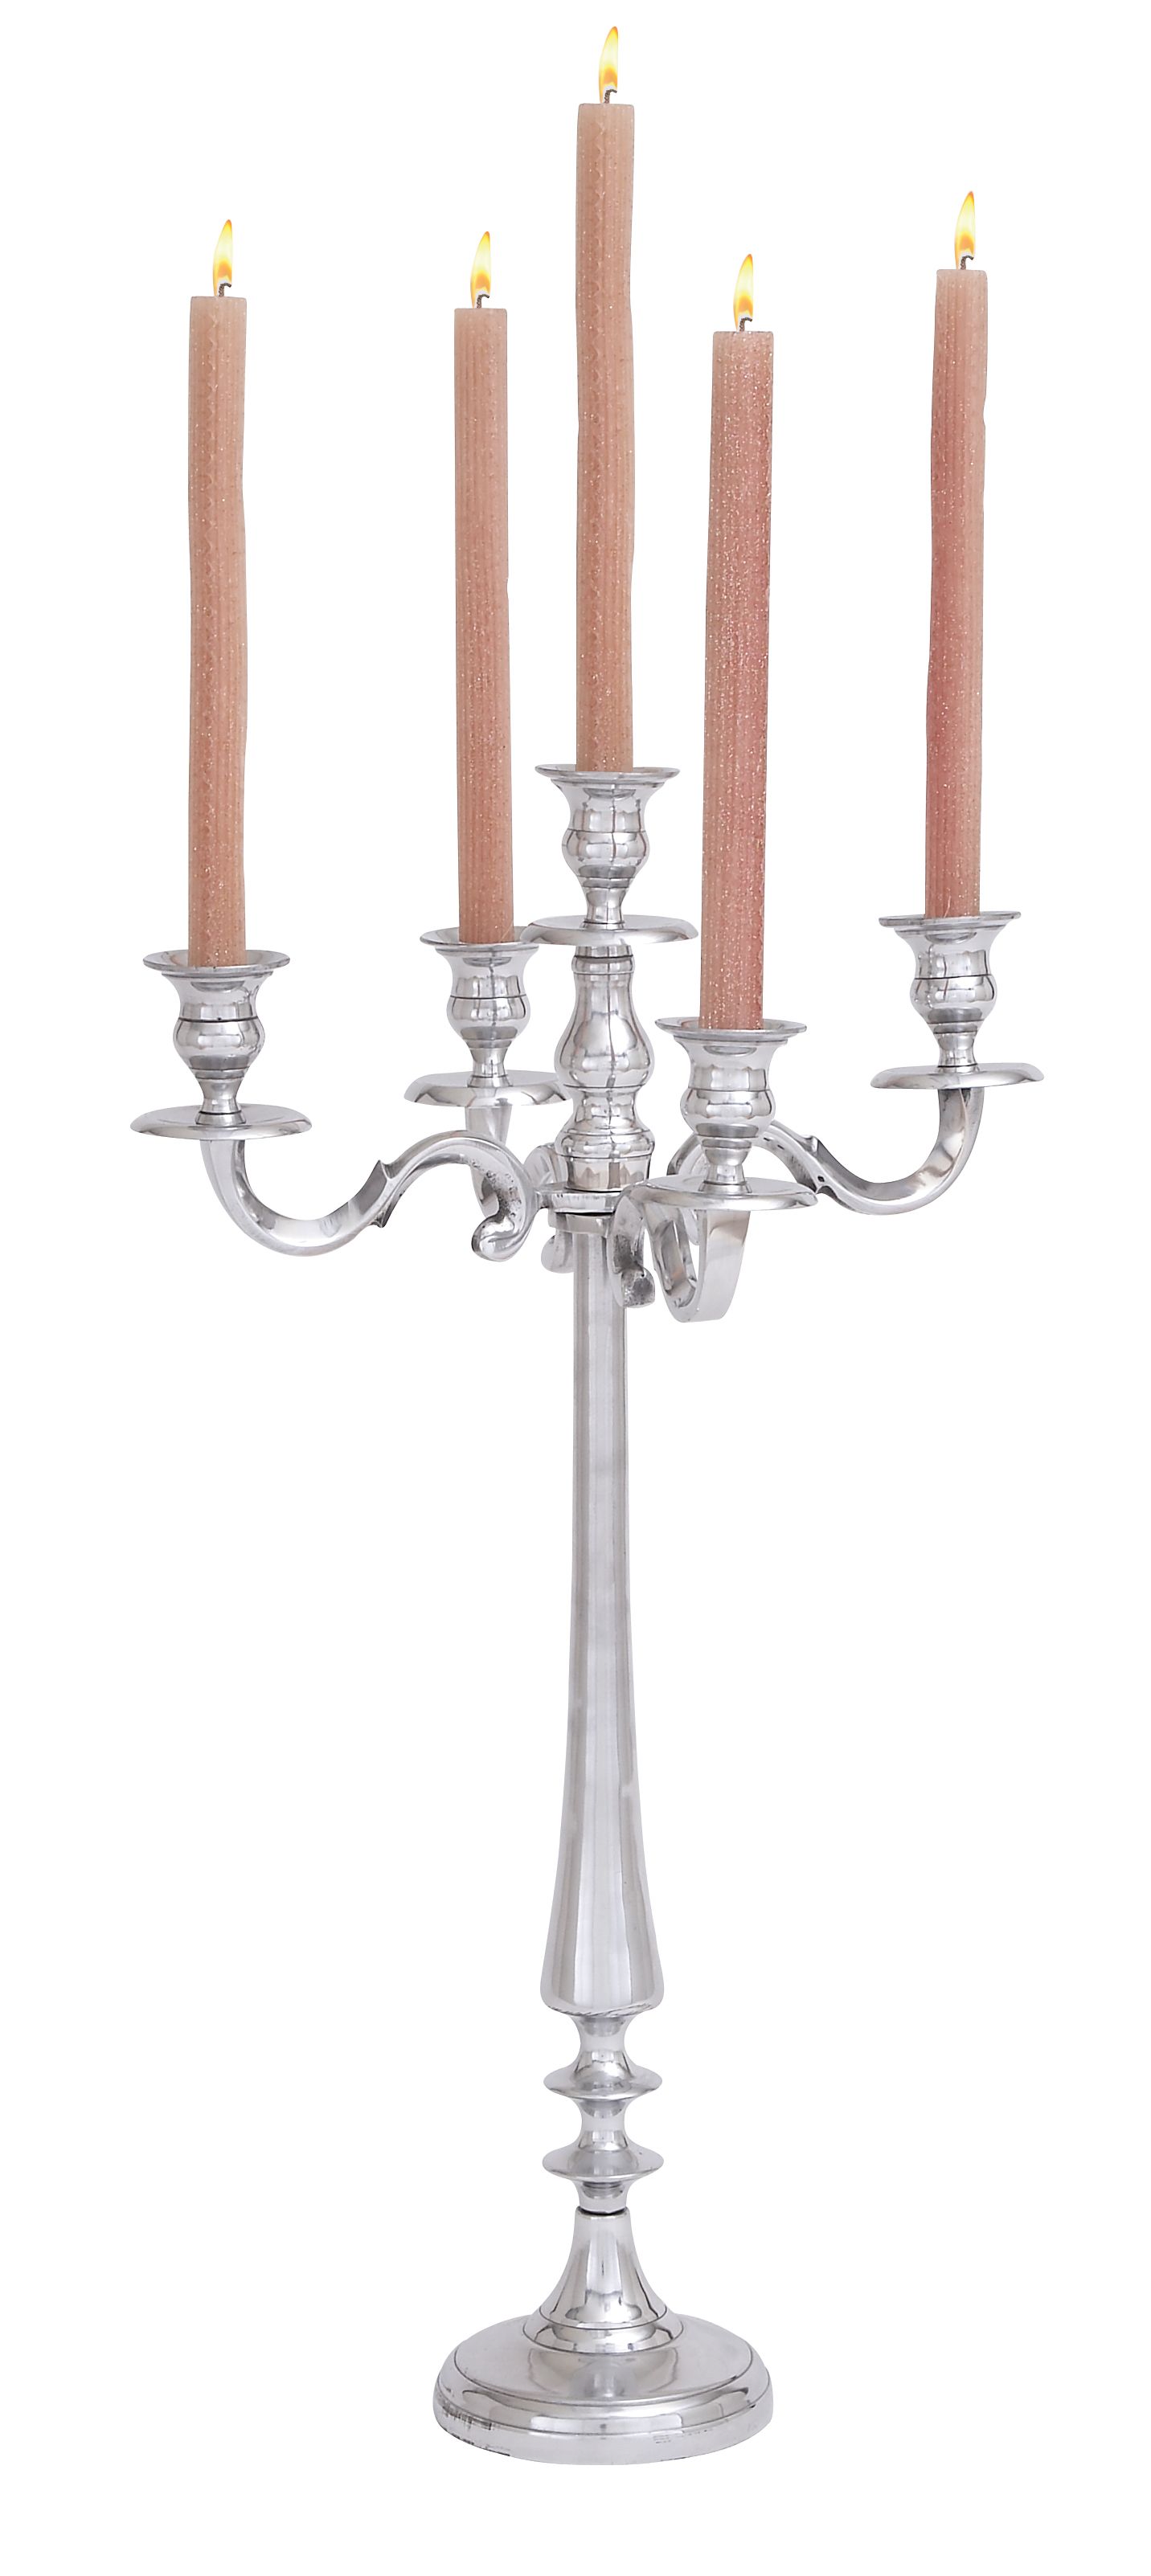 Decmode Traditional 24 Inch Metal 5-Candle Candelabra, Silver, Mirrored Finish | Walmart (US)